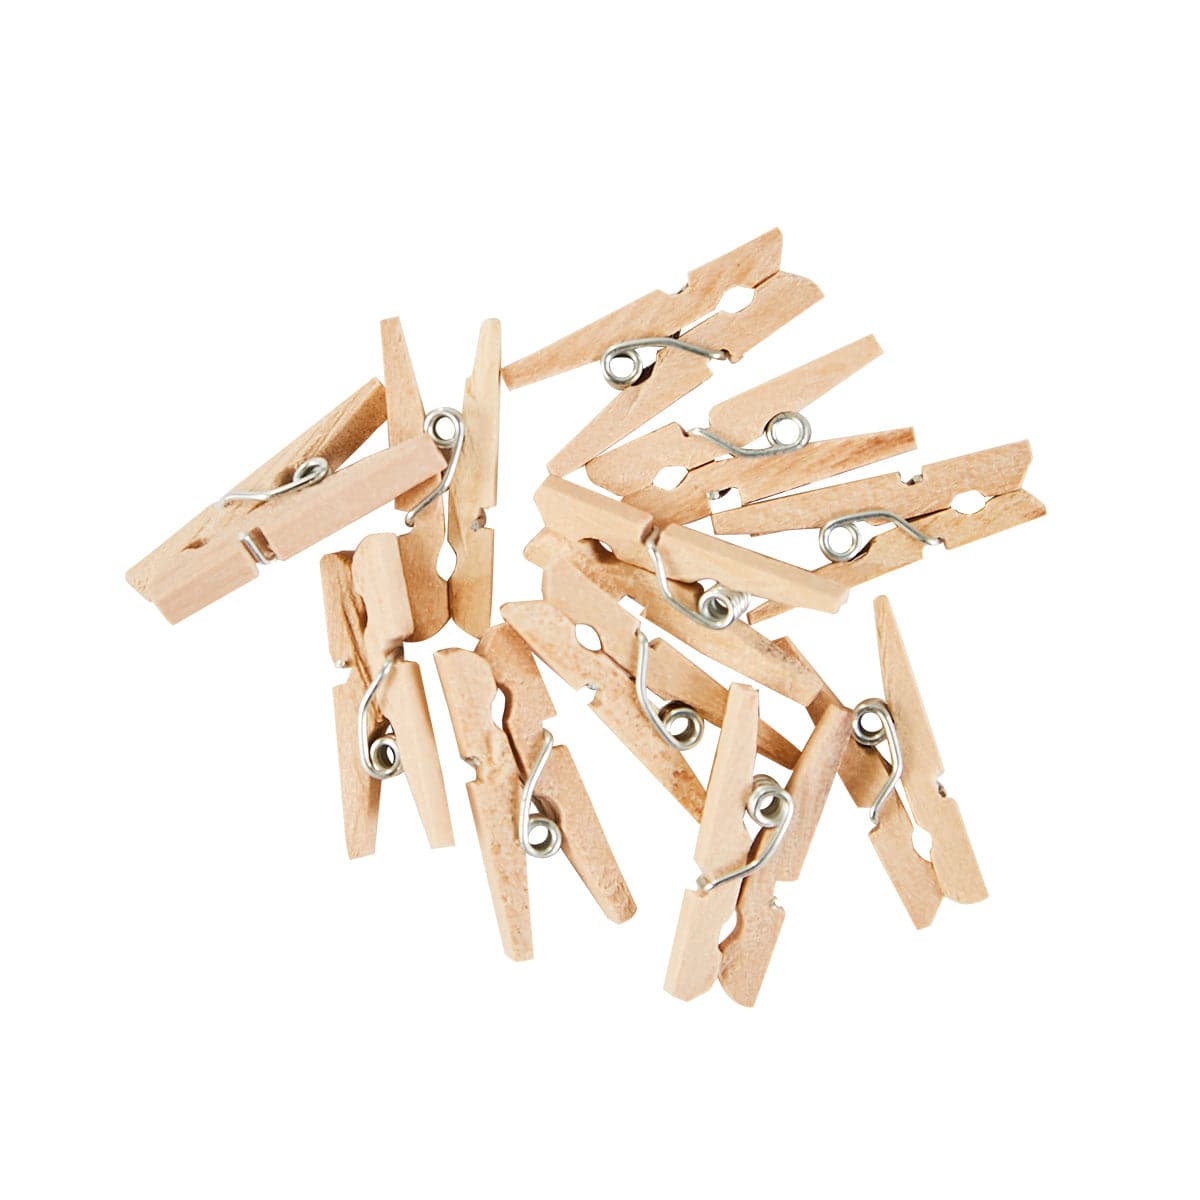 Alipis 300PCS Clothesline Clips Wooden Clothespin Recipe Binder Wooden pegs  Photo Paper Pegs Decorative Mini Clothespin Craft Clips Mini clothespins